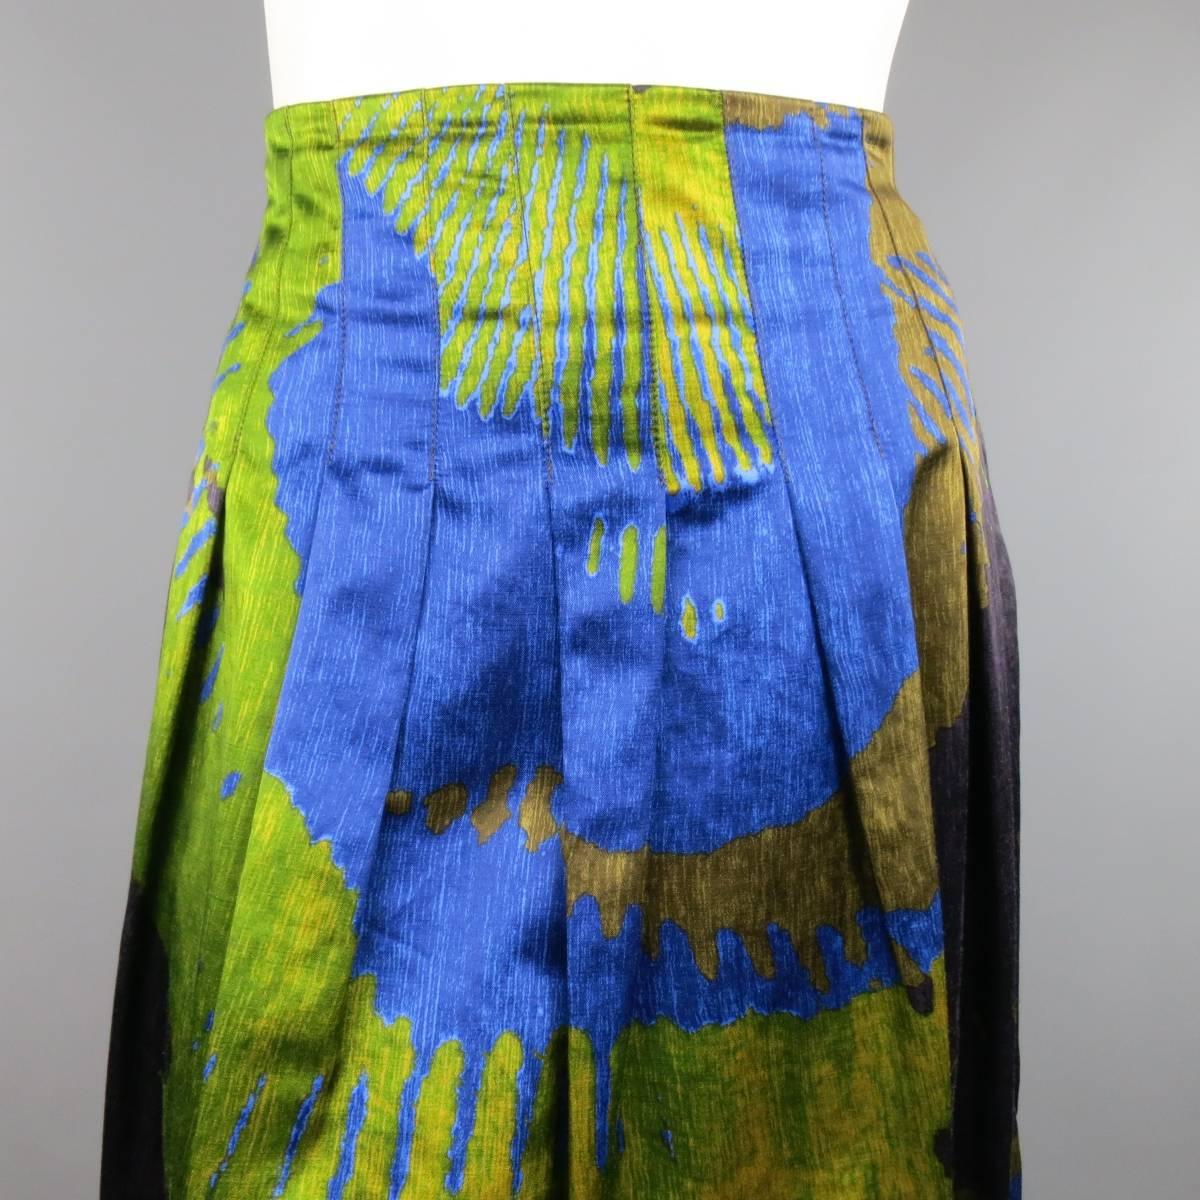 ETRO multi-colored blue, green, yellow, and plum A-line skirt in an abstract print. Featuring a cotton/viscose satin blend and fully lined in rayon/acetate with side zipper closure. Made in Italy.
 
Excellent Pre-Owned Condition. Retails at